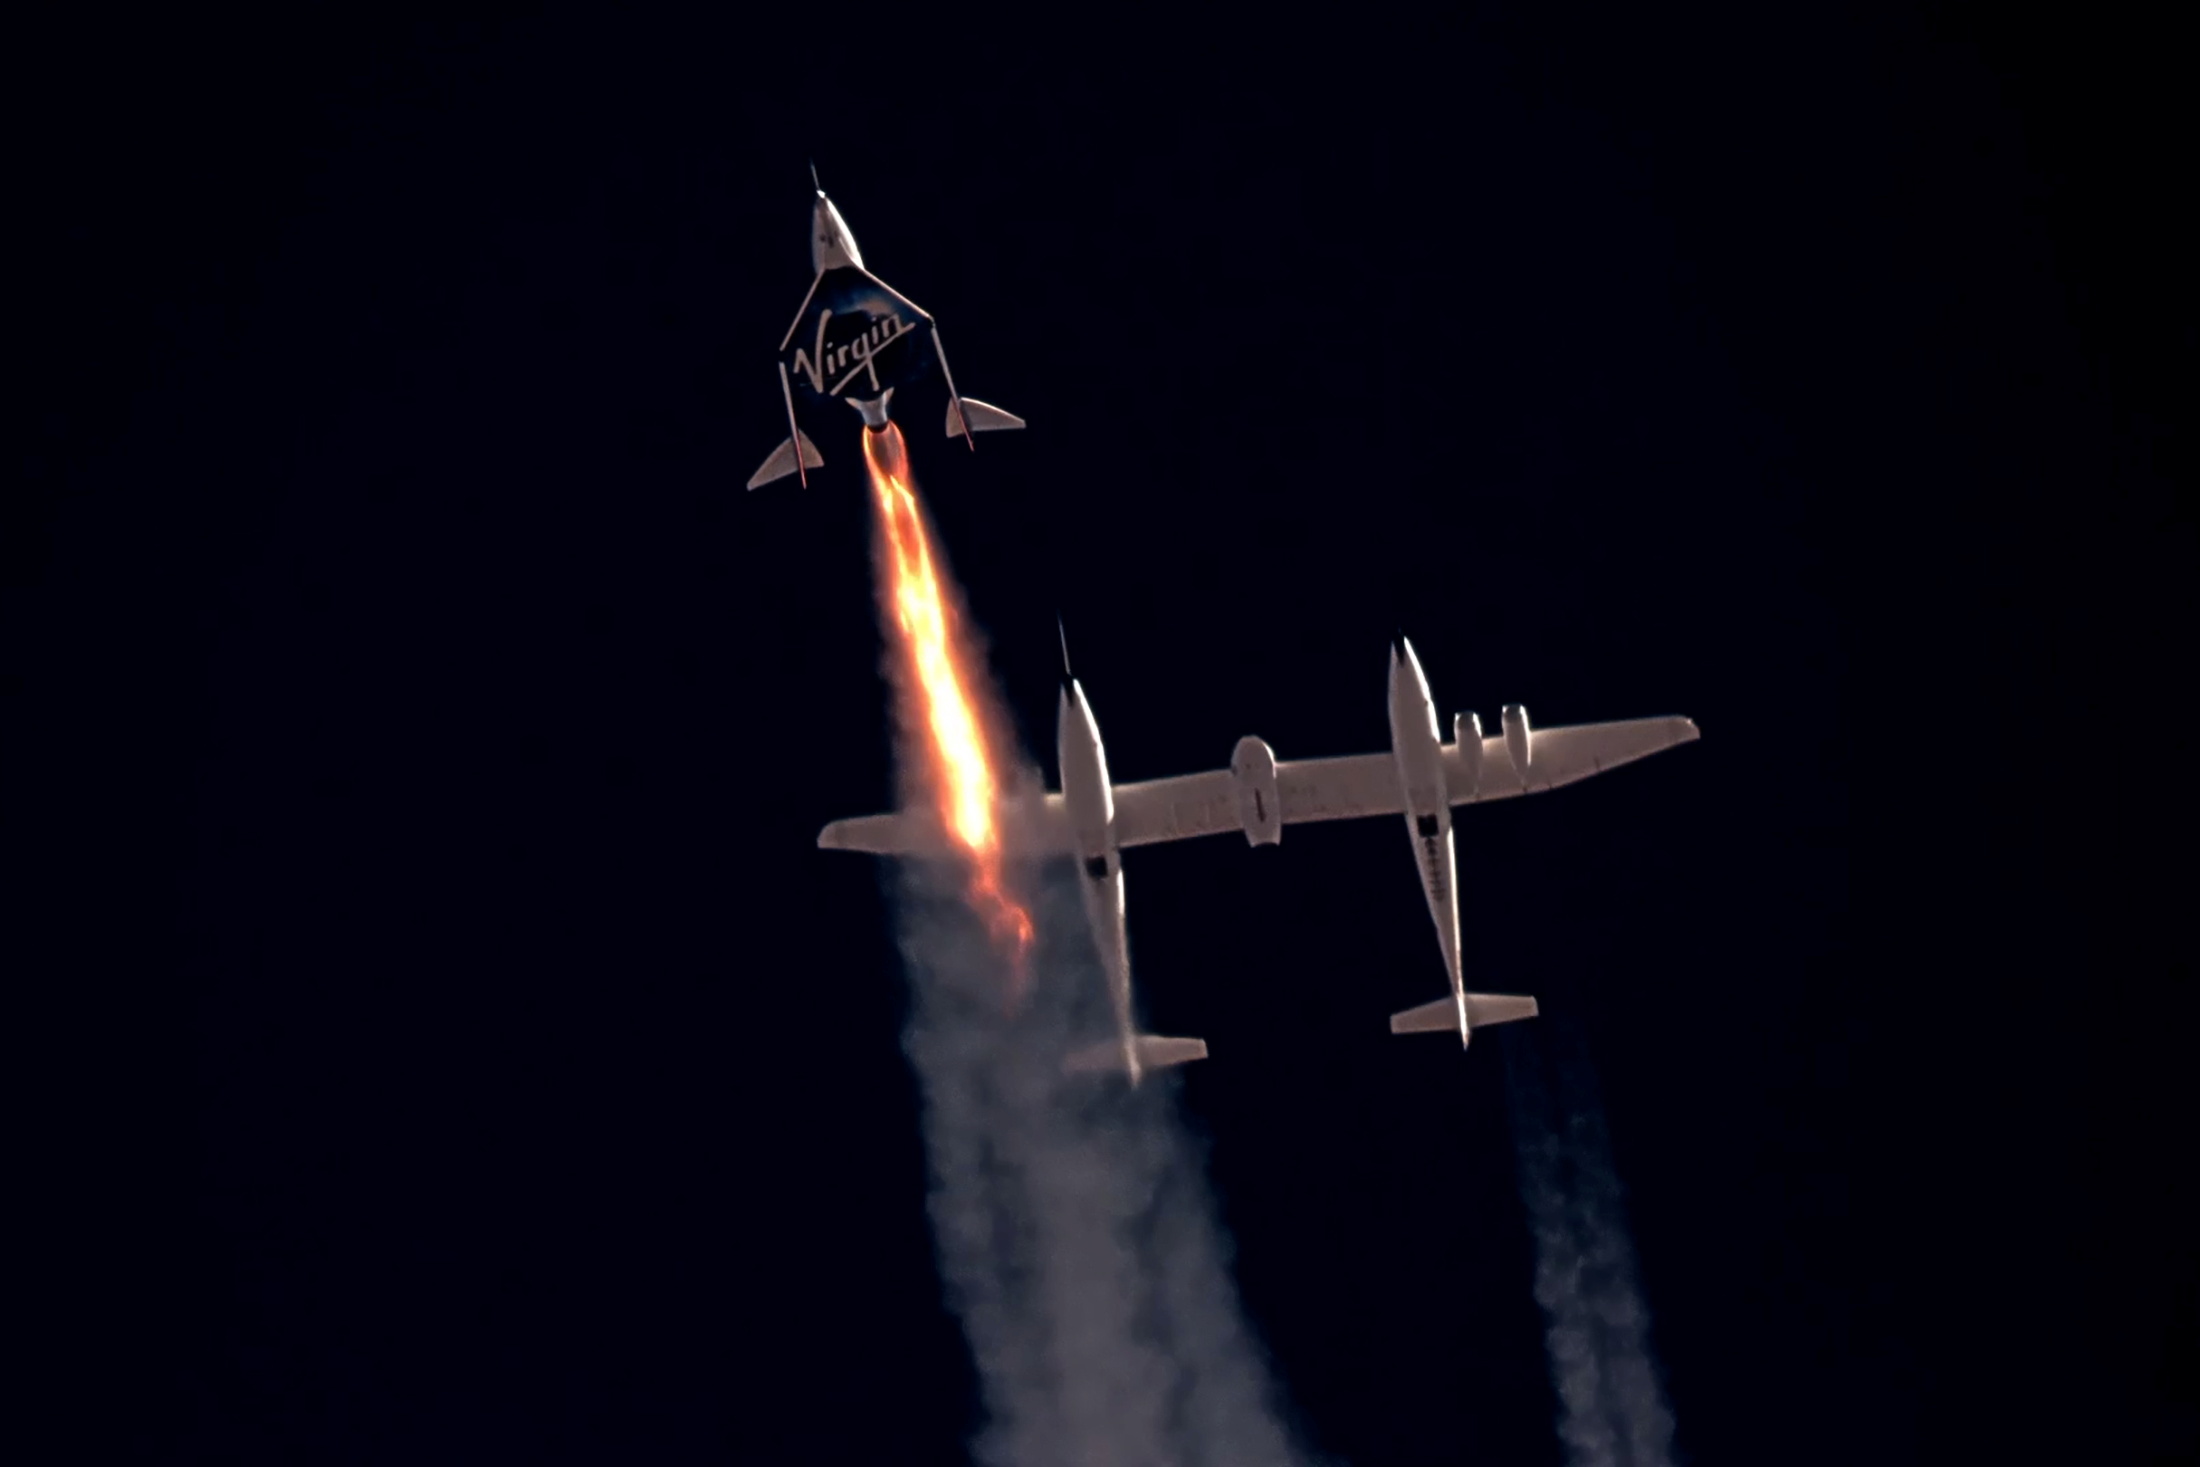 Virgin Galactic's passenger rocket plane VSS Unity begins its ascent to the edge of space above Spaceport America